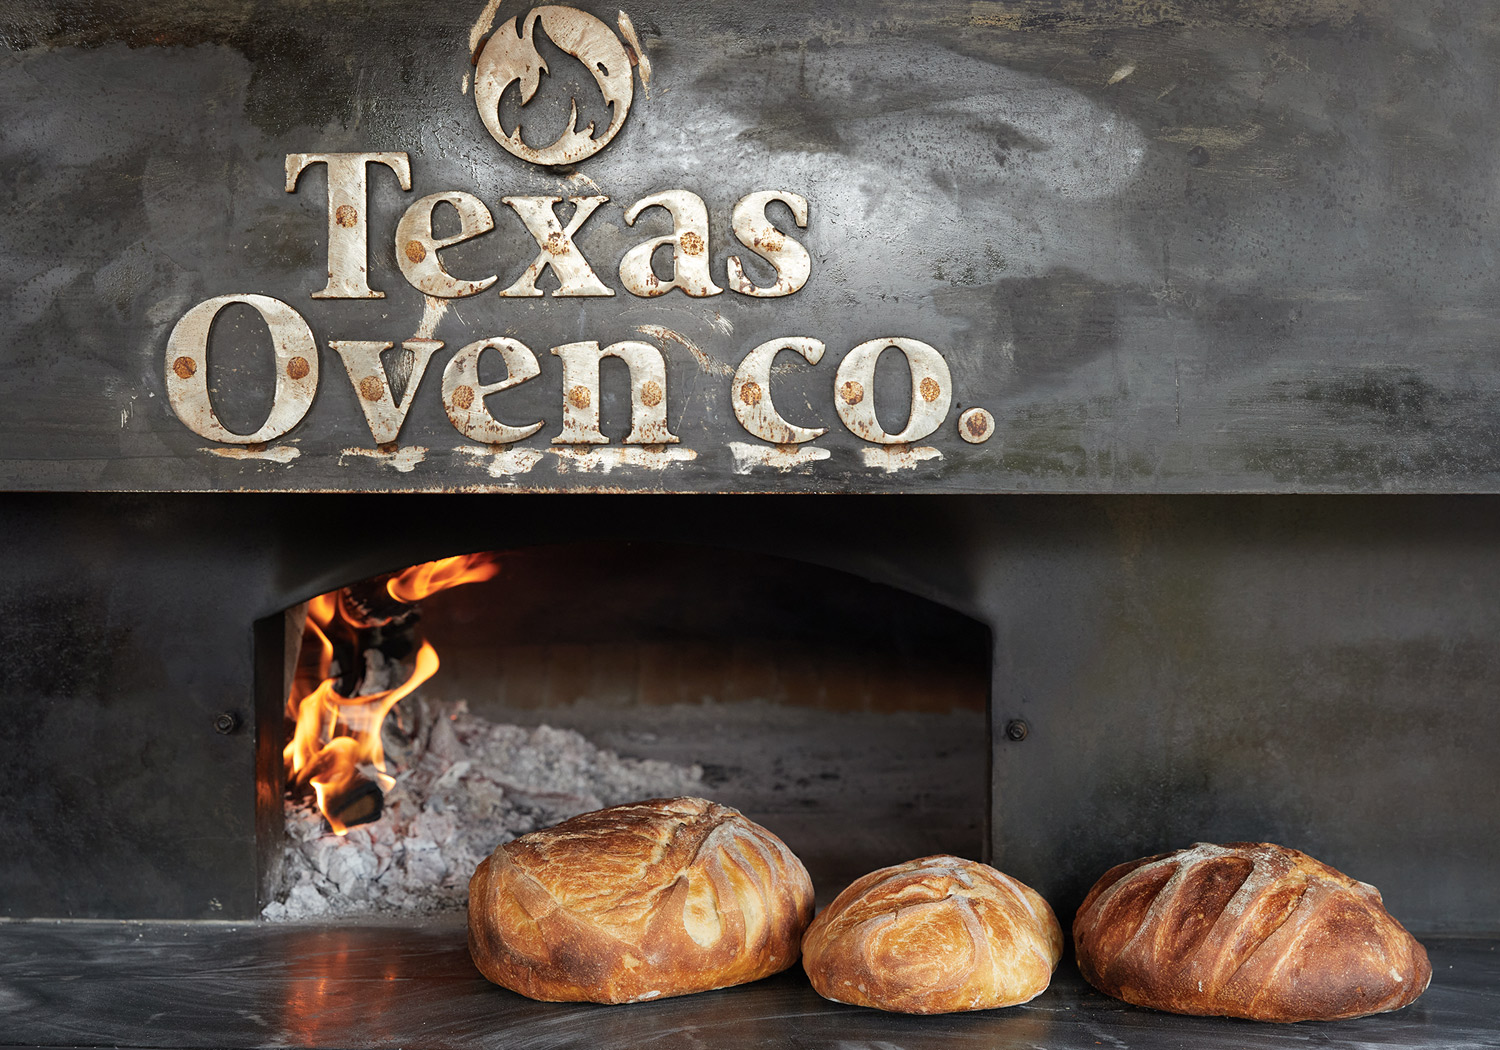 Texas Oven Co by lifestyle and food photographer Buff Strickland